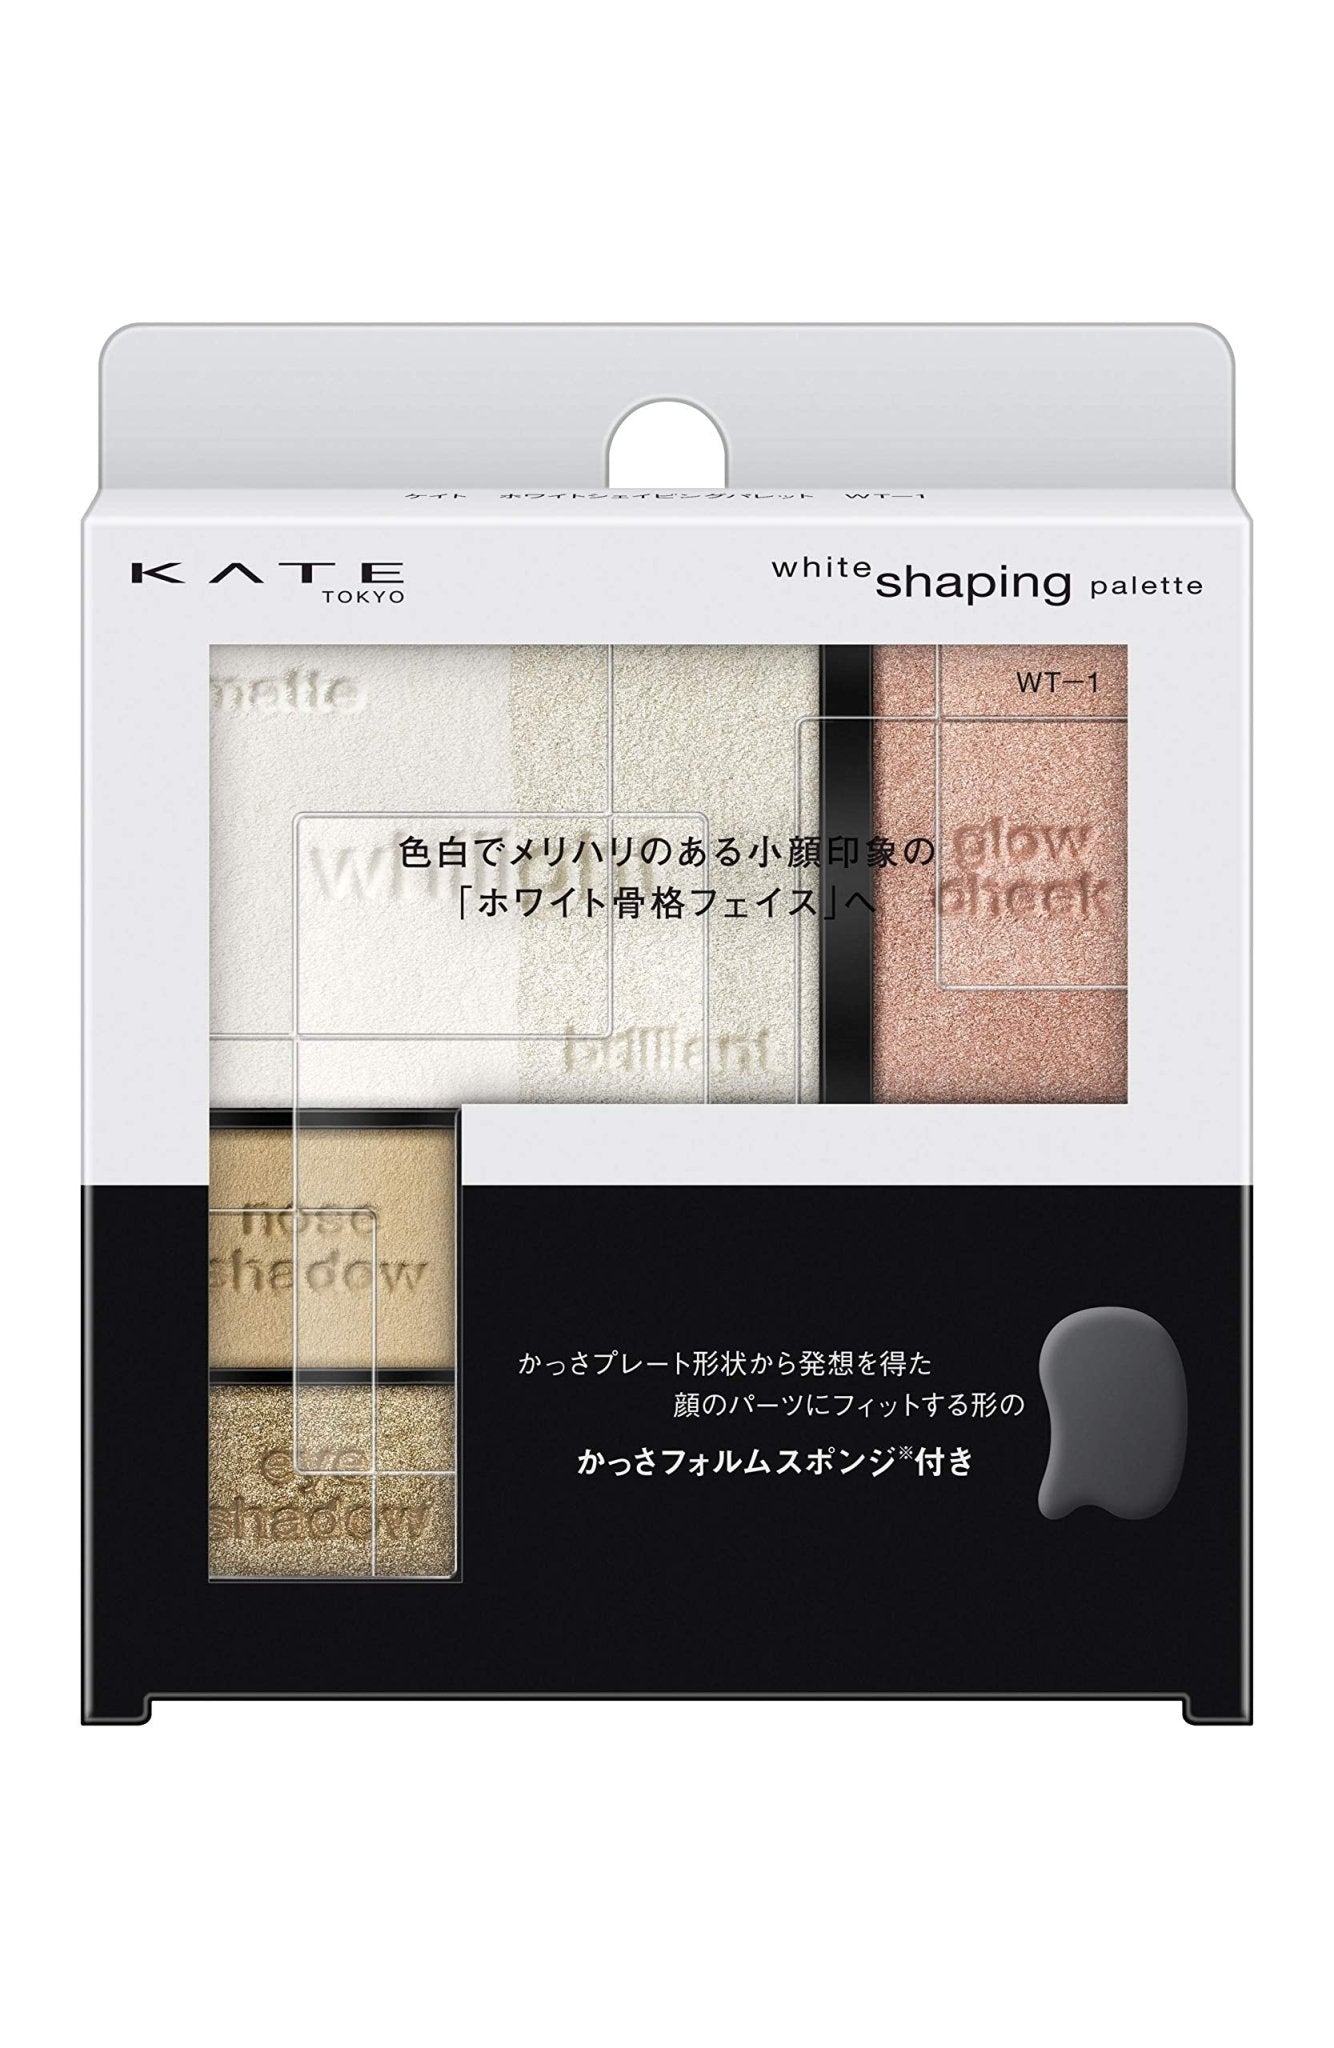 Kate Shaping Palette WT - 1 - Pure White Eyeshadow for Perfect Contour